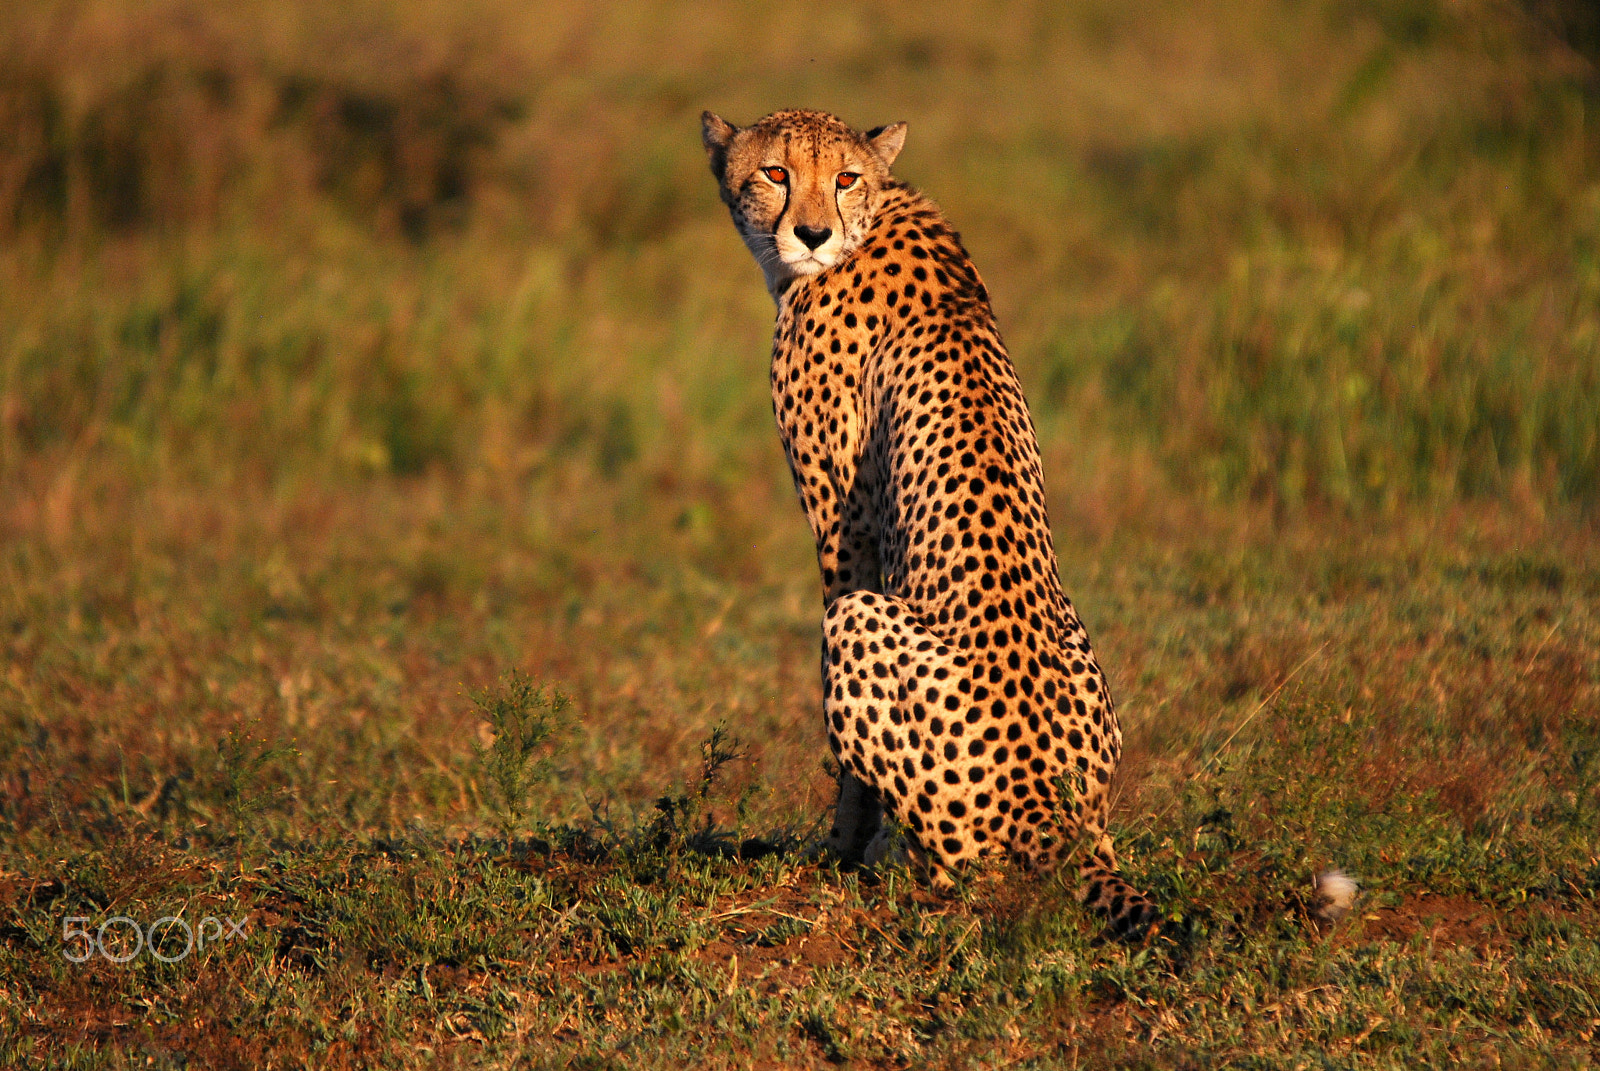 Nikon D80 + Sigma 120-400mm F4.5-5.6 DG OS HSM sample photo. Adult female cheetah in game reserve photography